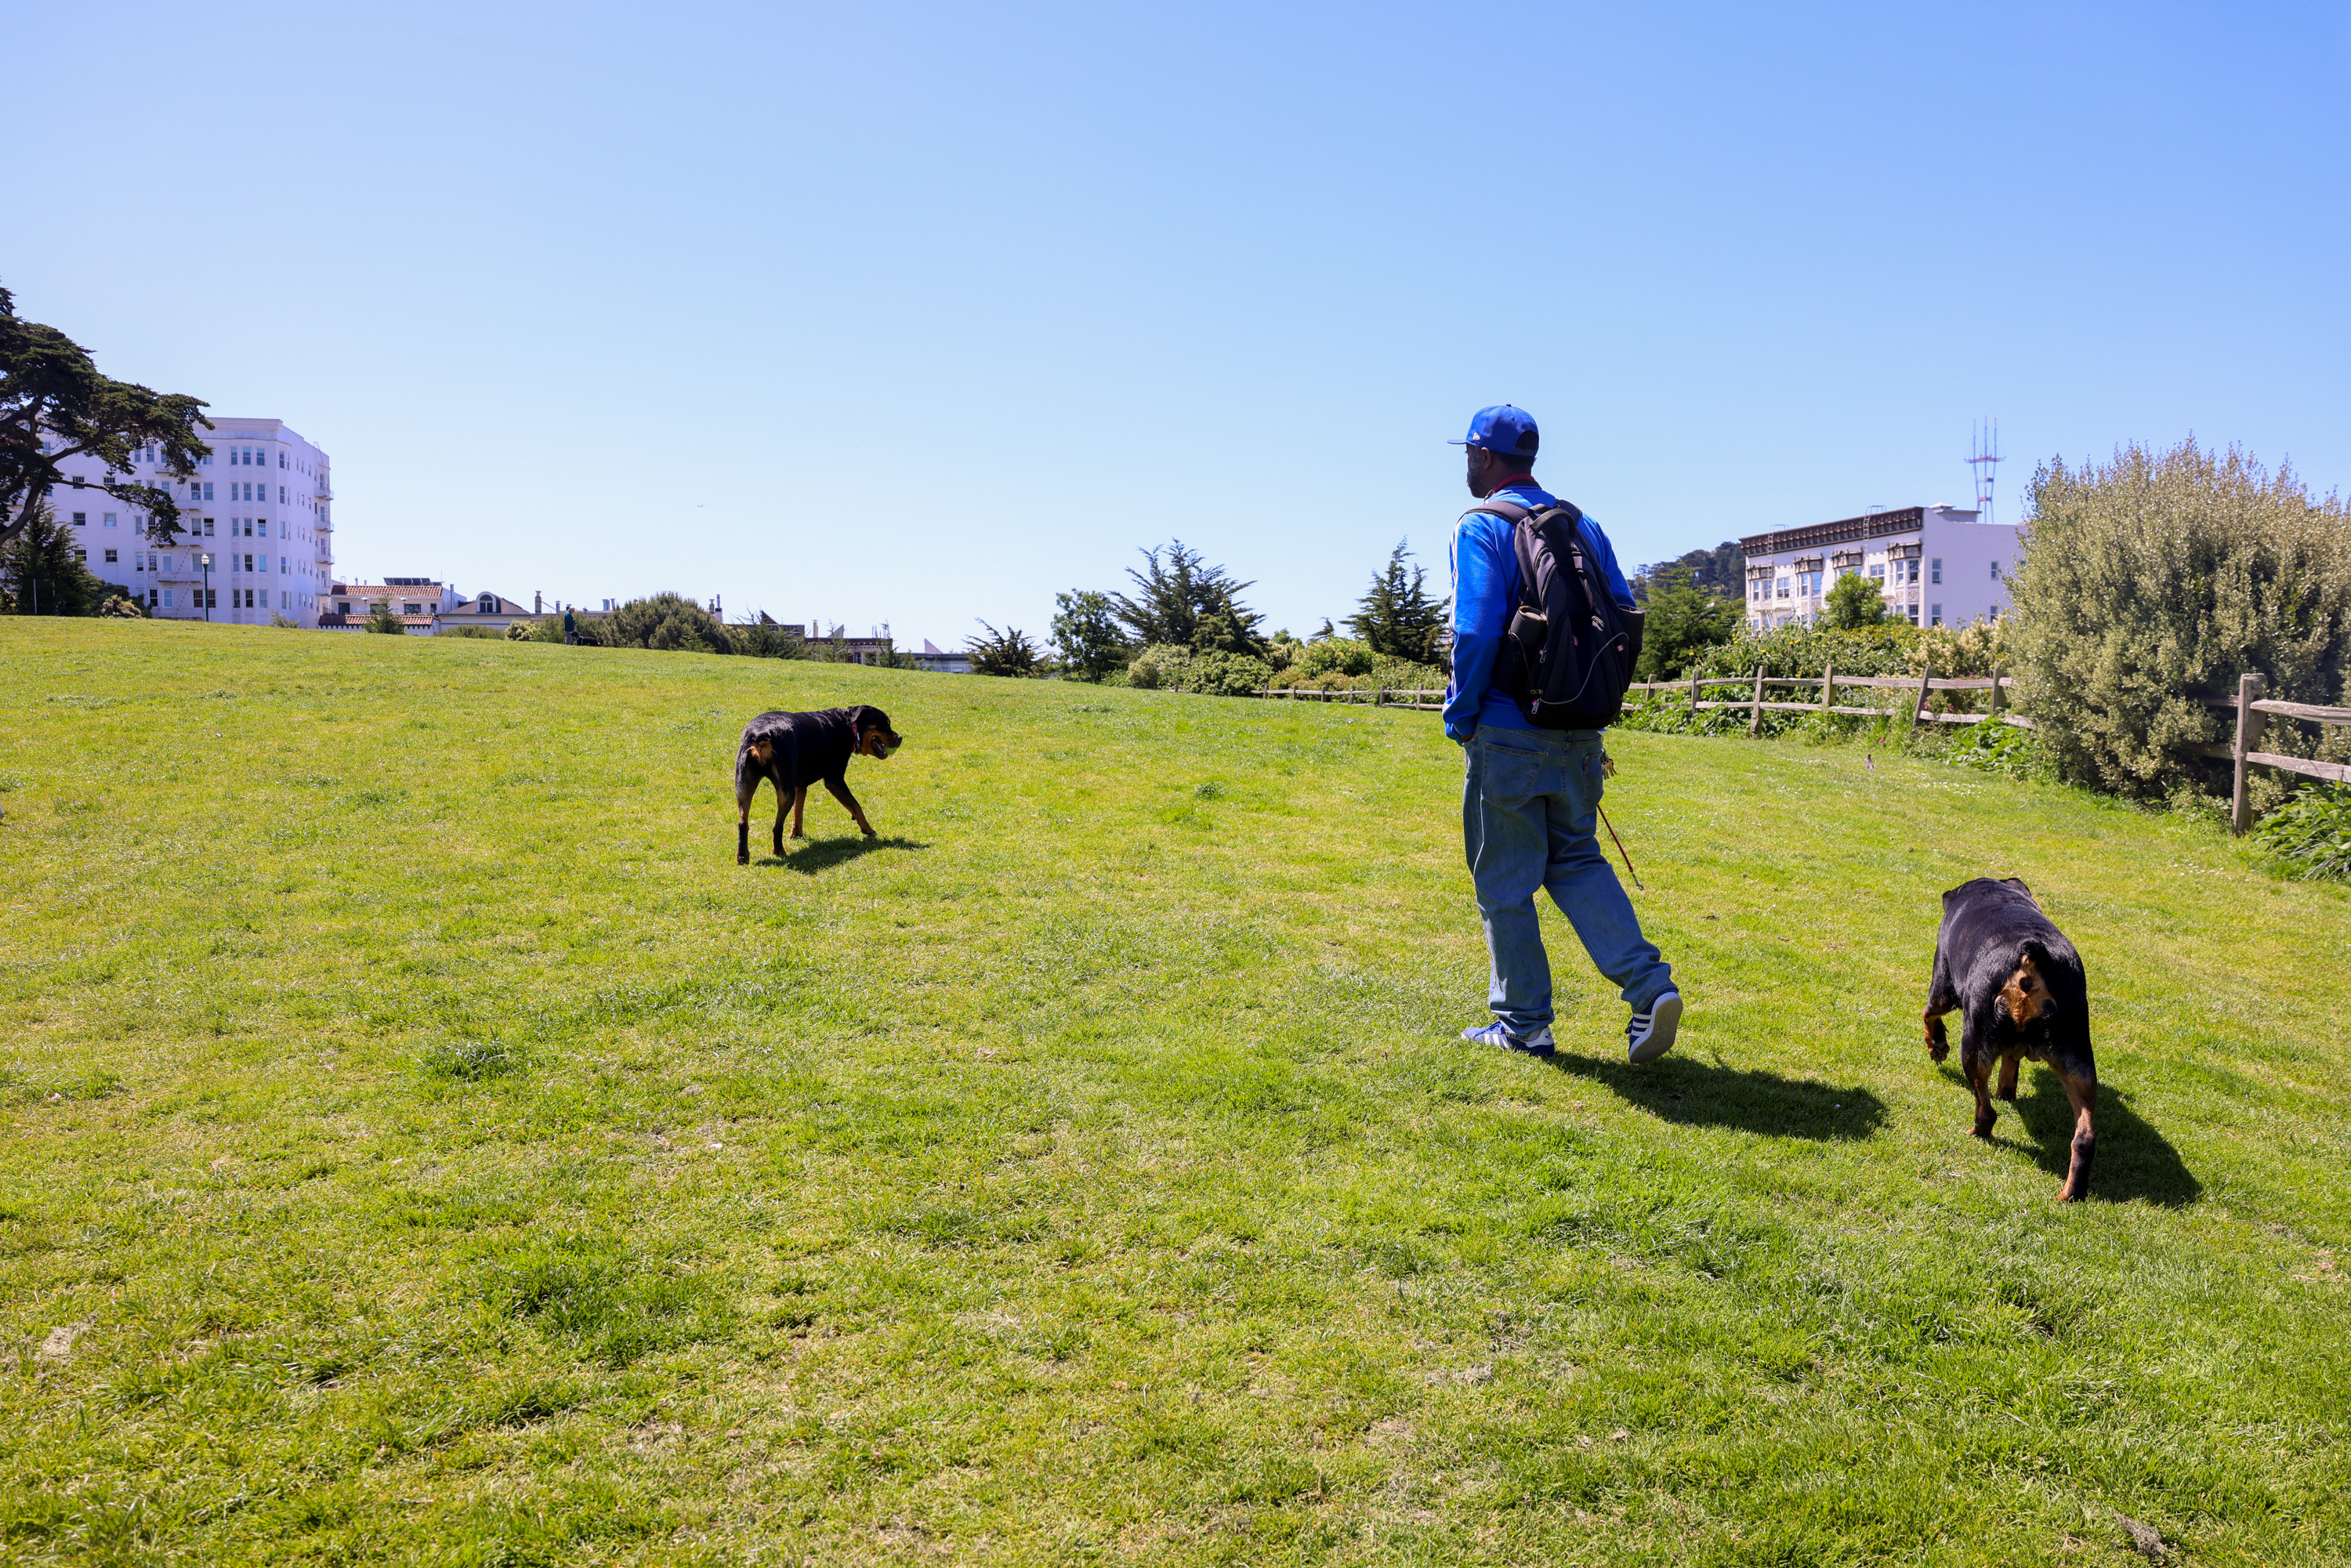 A person in blue walks with two dogs on a sunny grass field near buildings.